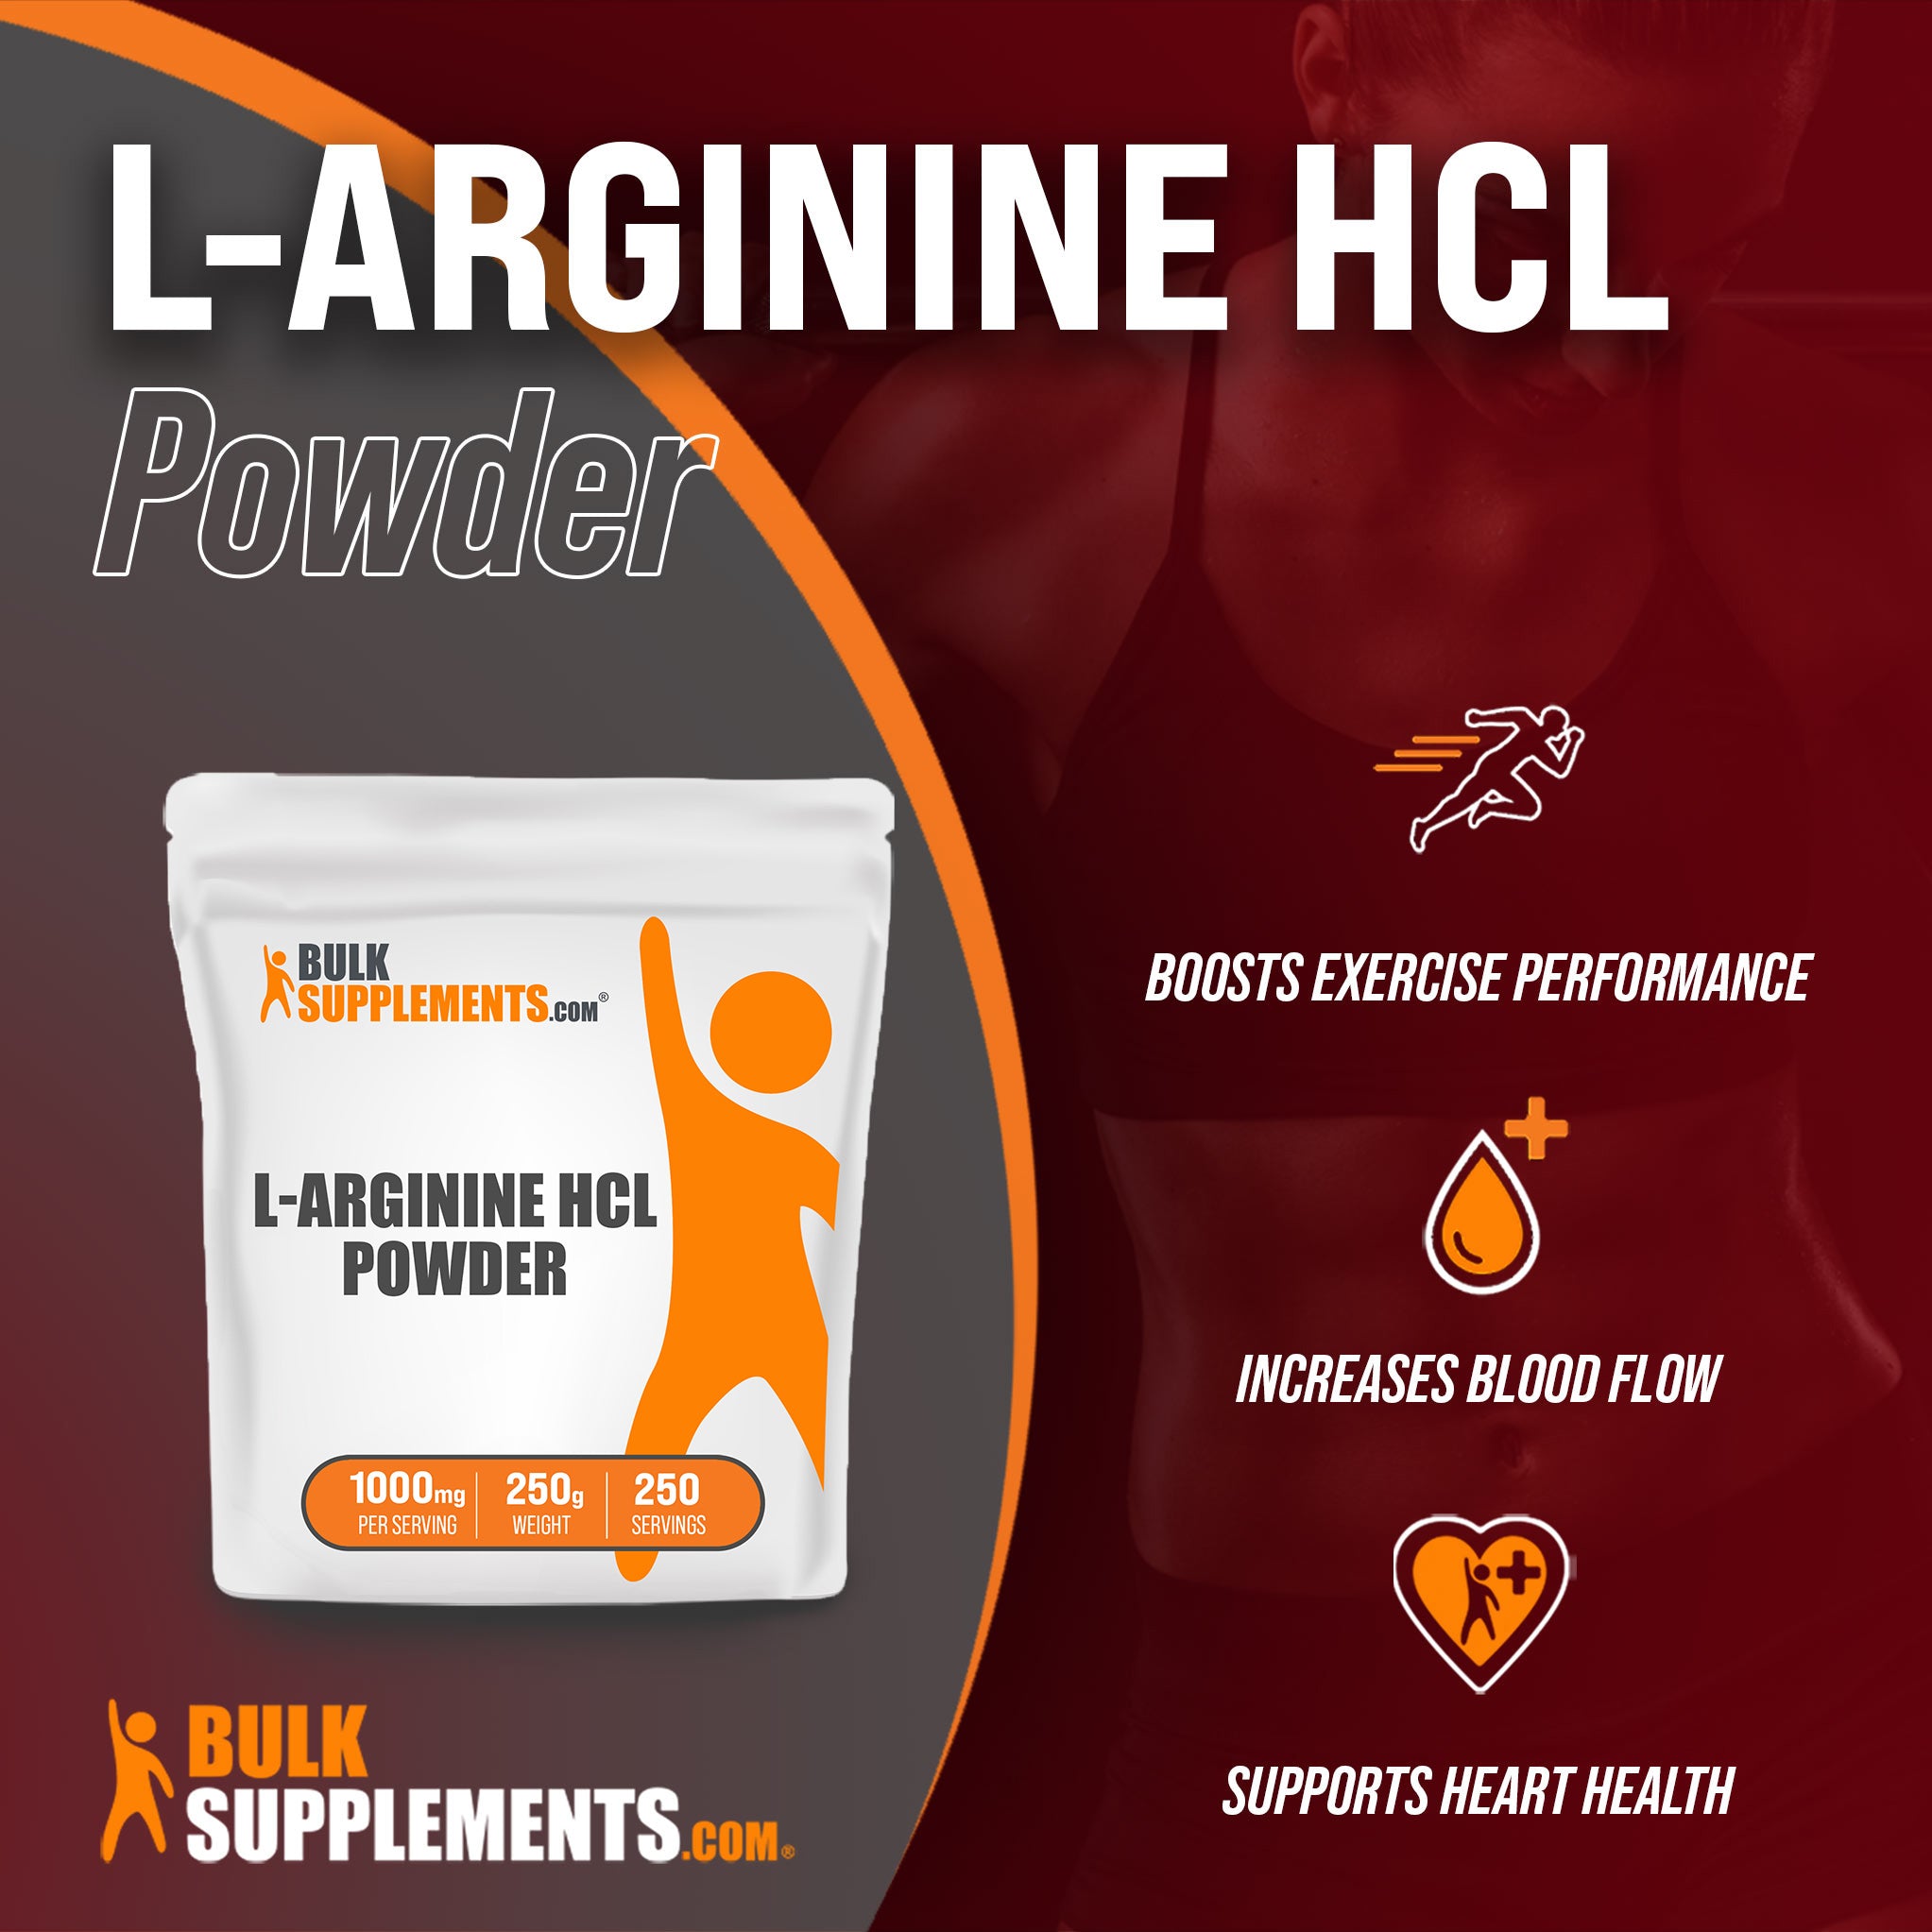 Benefits of L-Arginine HCl: boosts exercise performance, increases blood flow, supports heart health